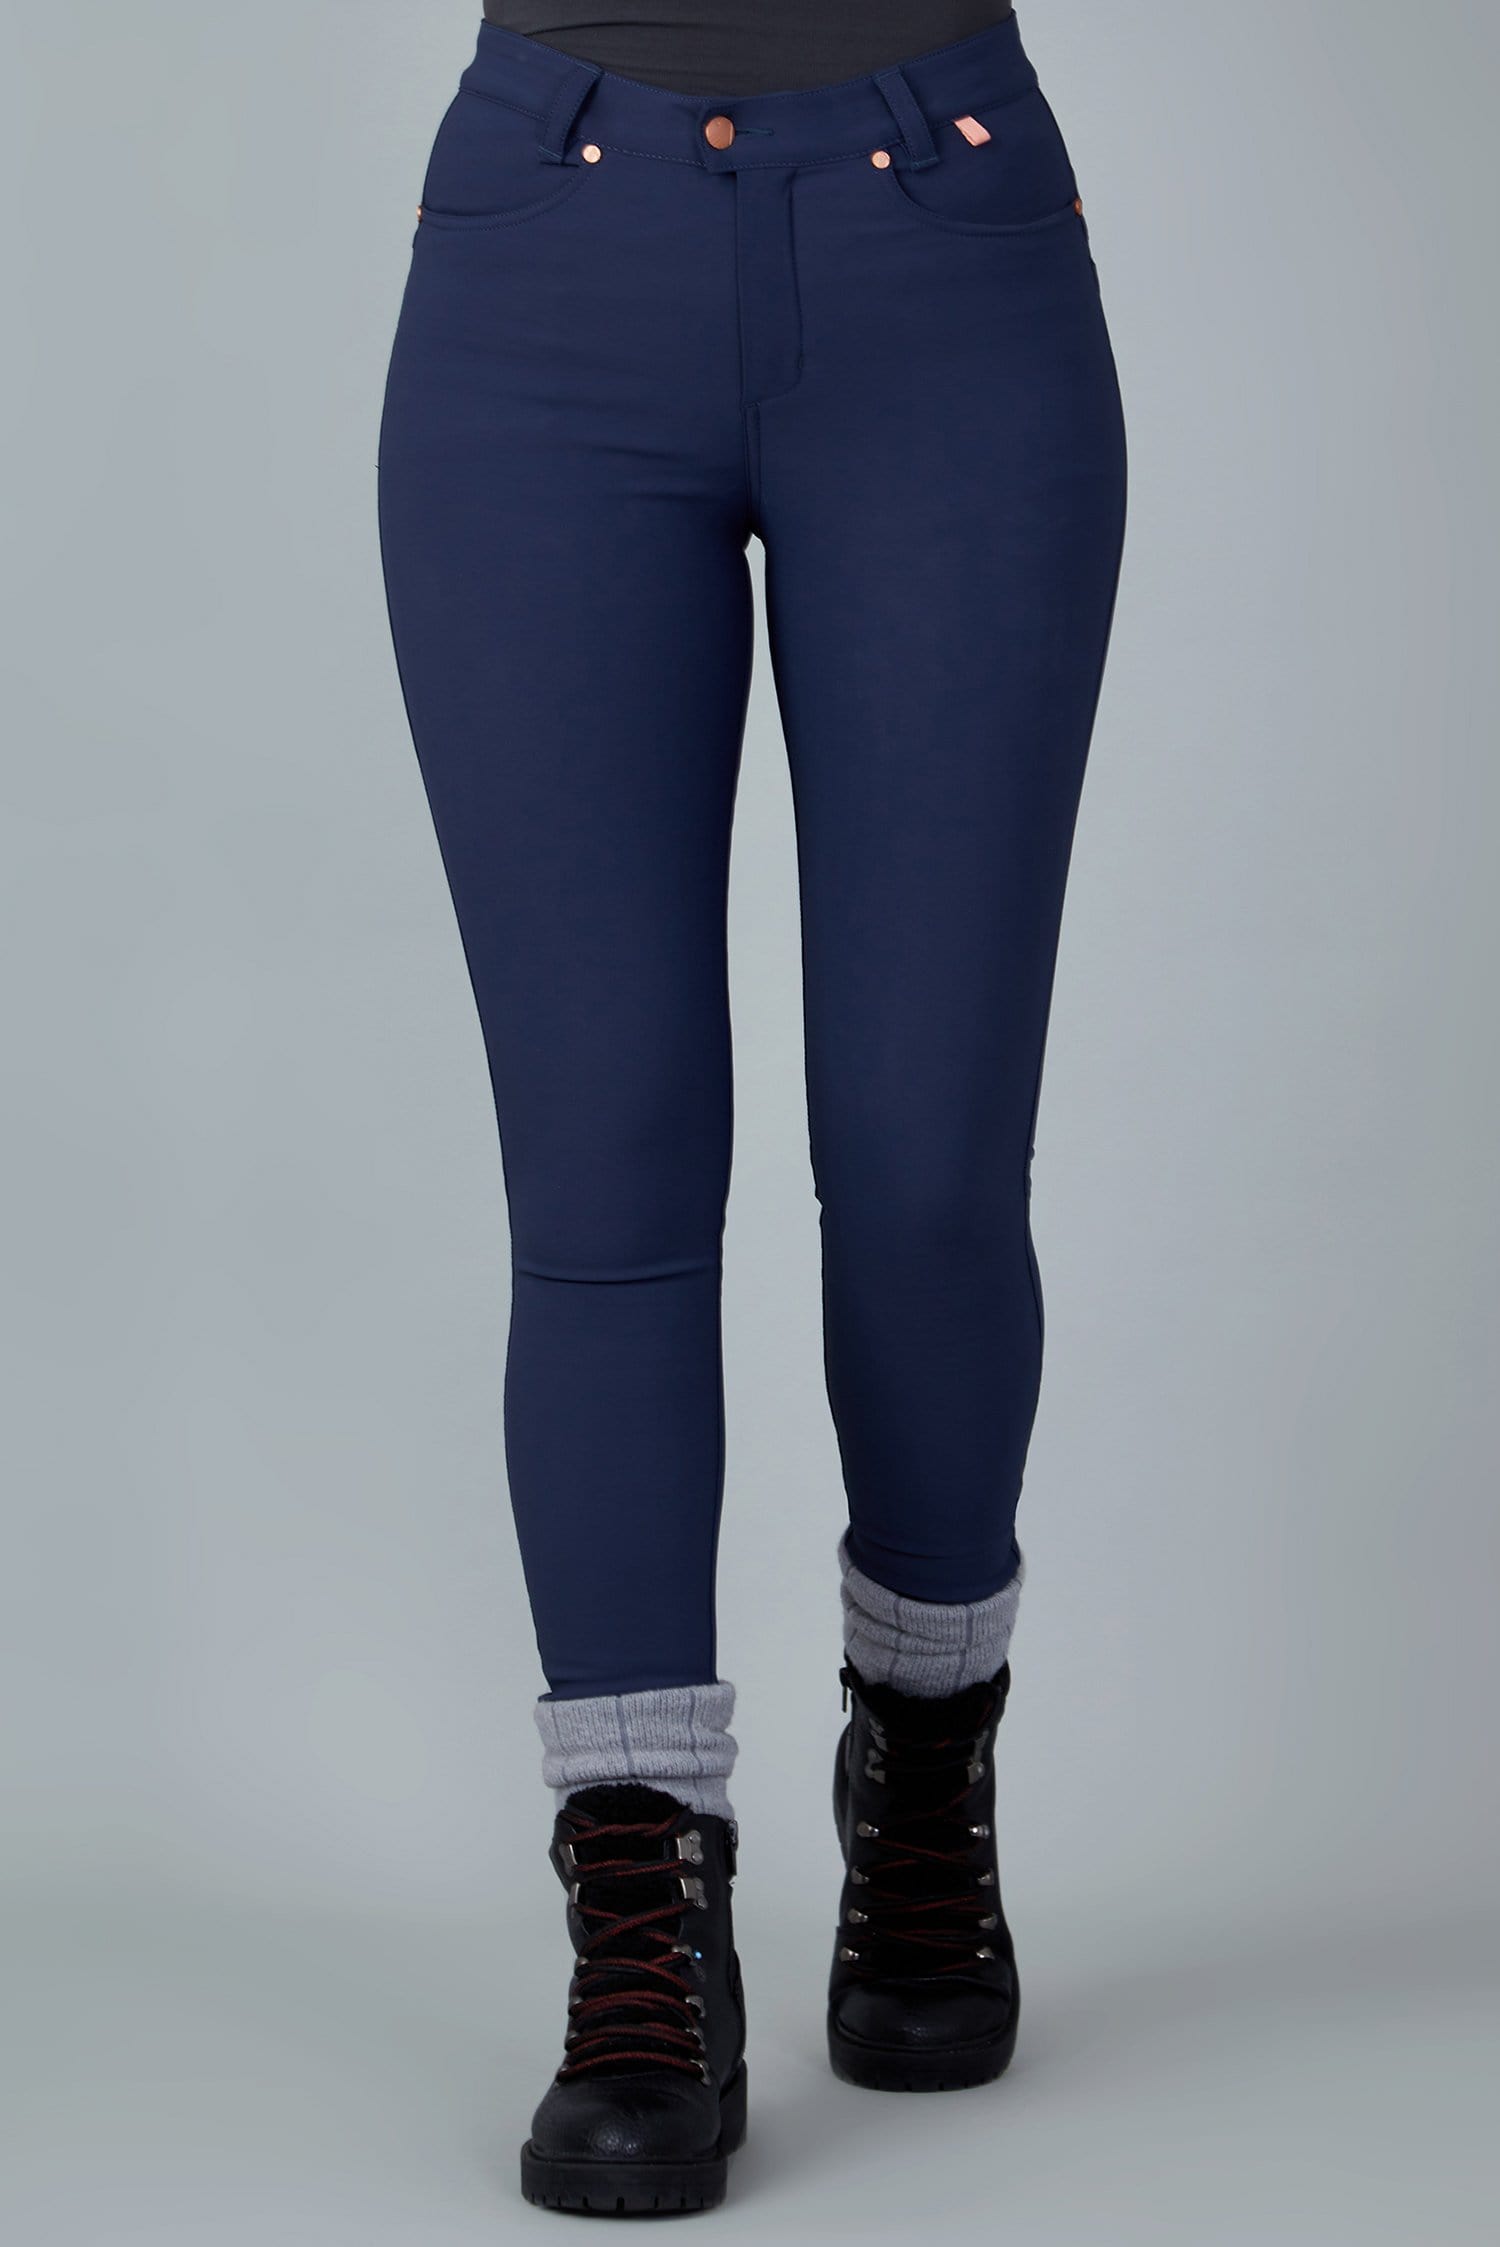 The Aventurite Stretch Skinny Outdoor Trousers - Midnight Blue - 24p / Uk6 - Womens - Acai Outdoorwear